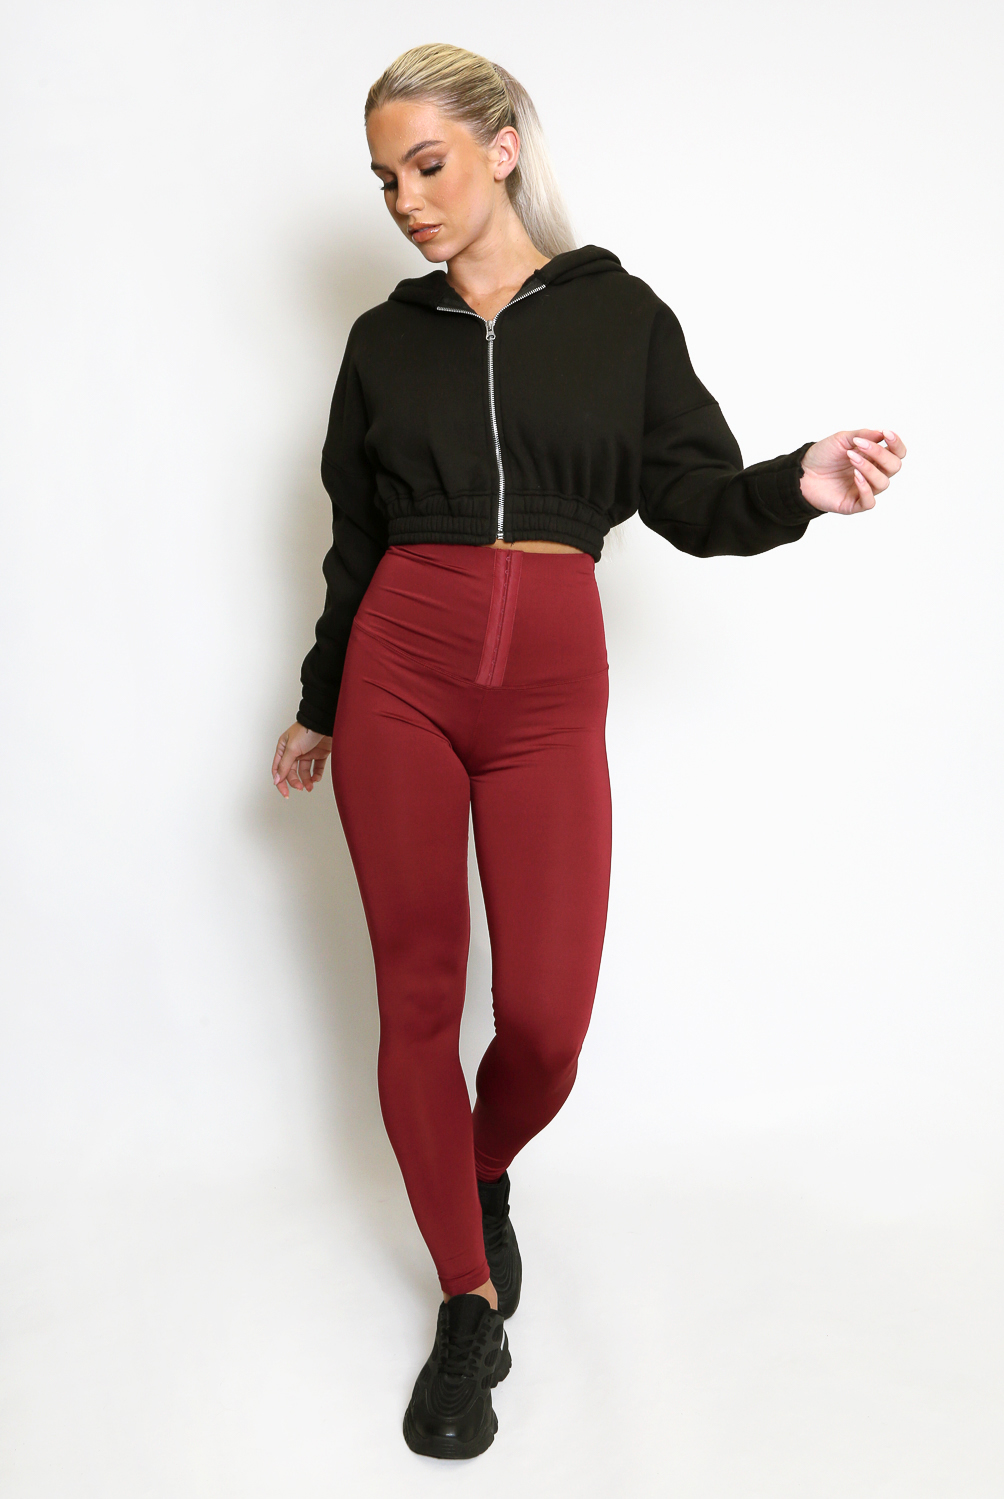 New Plain Lycra Leggings At Wholesale Price at Rs.60/Piece in tambaram  offer by Ajba Womens Wear